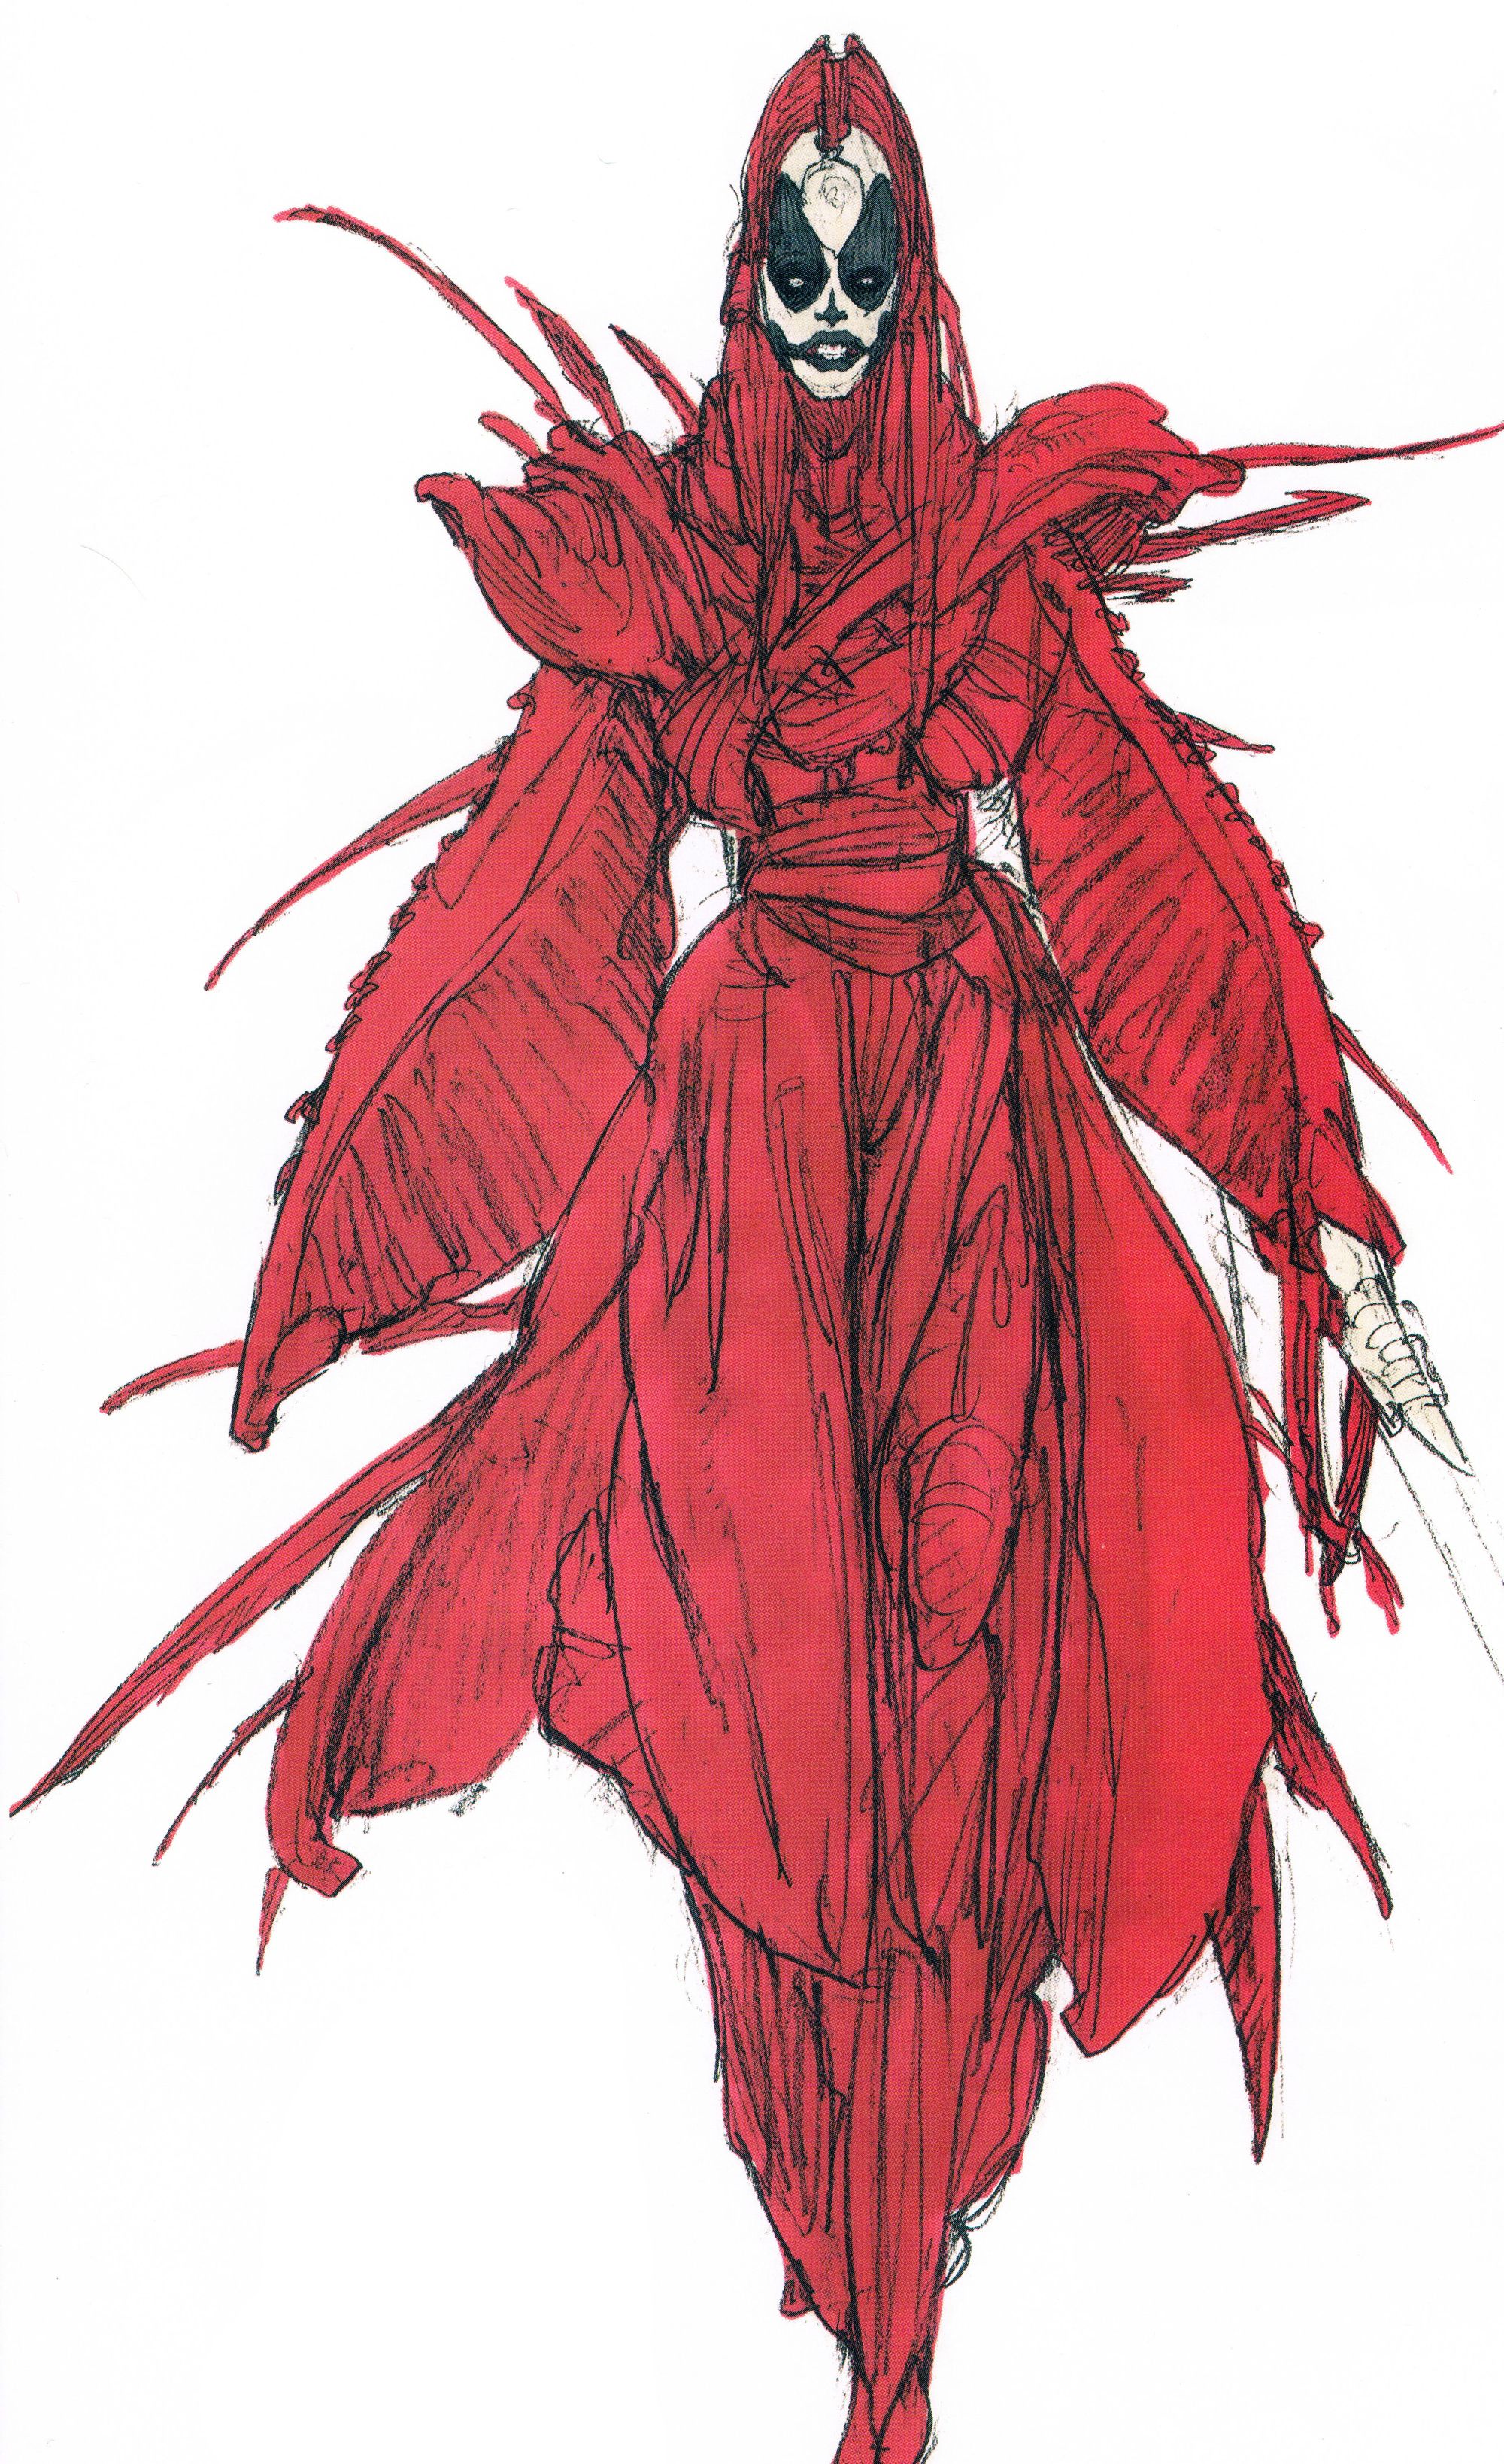 Iain McCaig's second design for a Sith Witch in Star Wars: The Phantom Menace